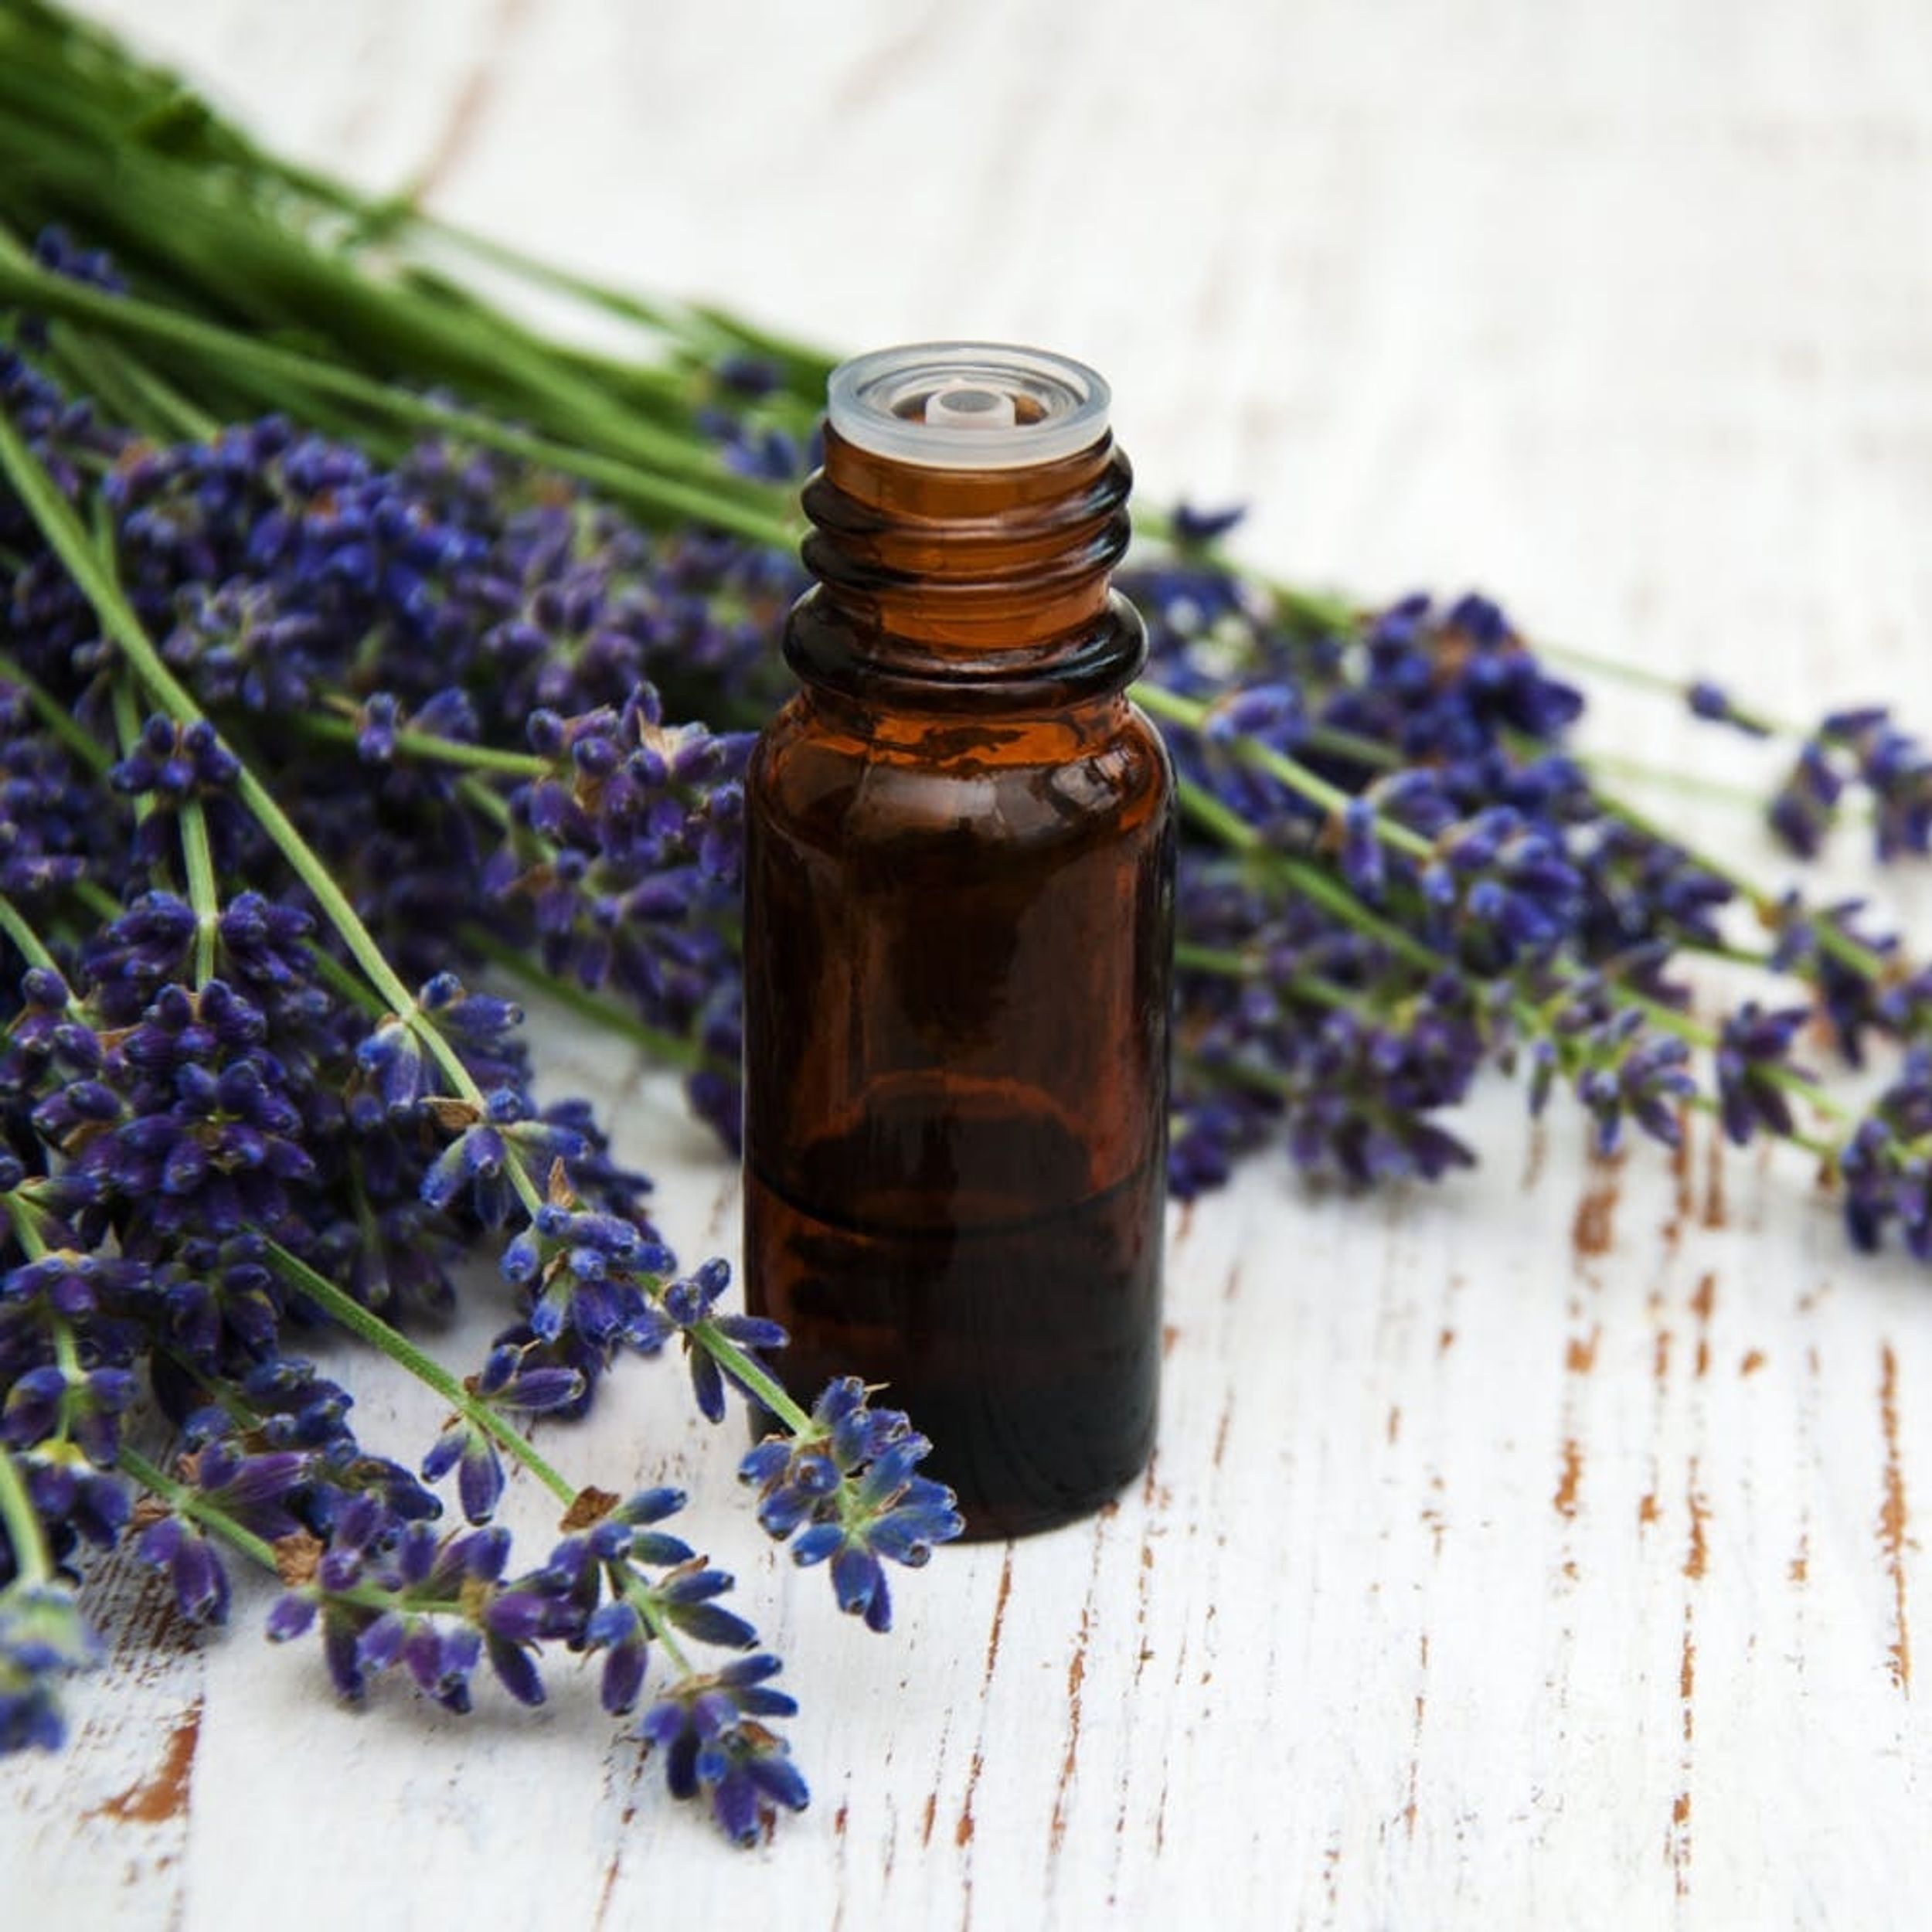 12 Aromatherapy Products for Some Much-Needed Rest and Relaxation